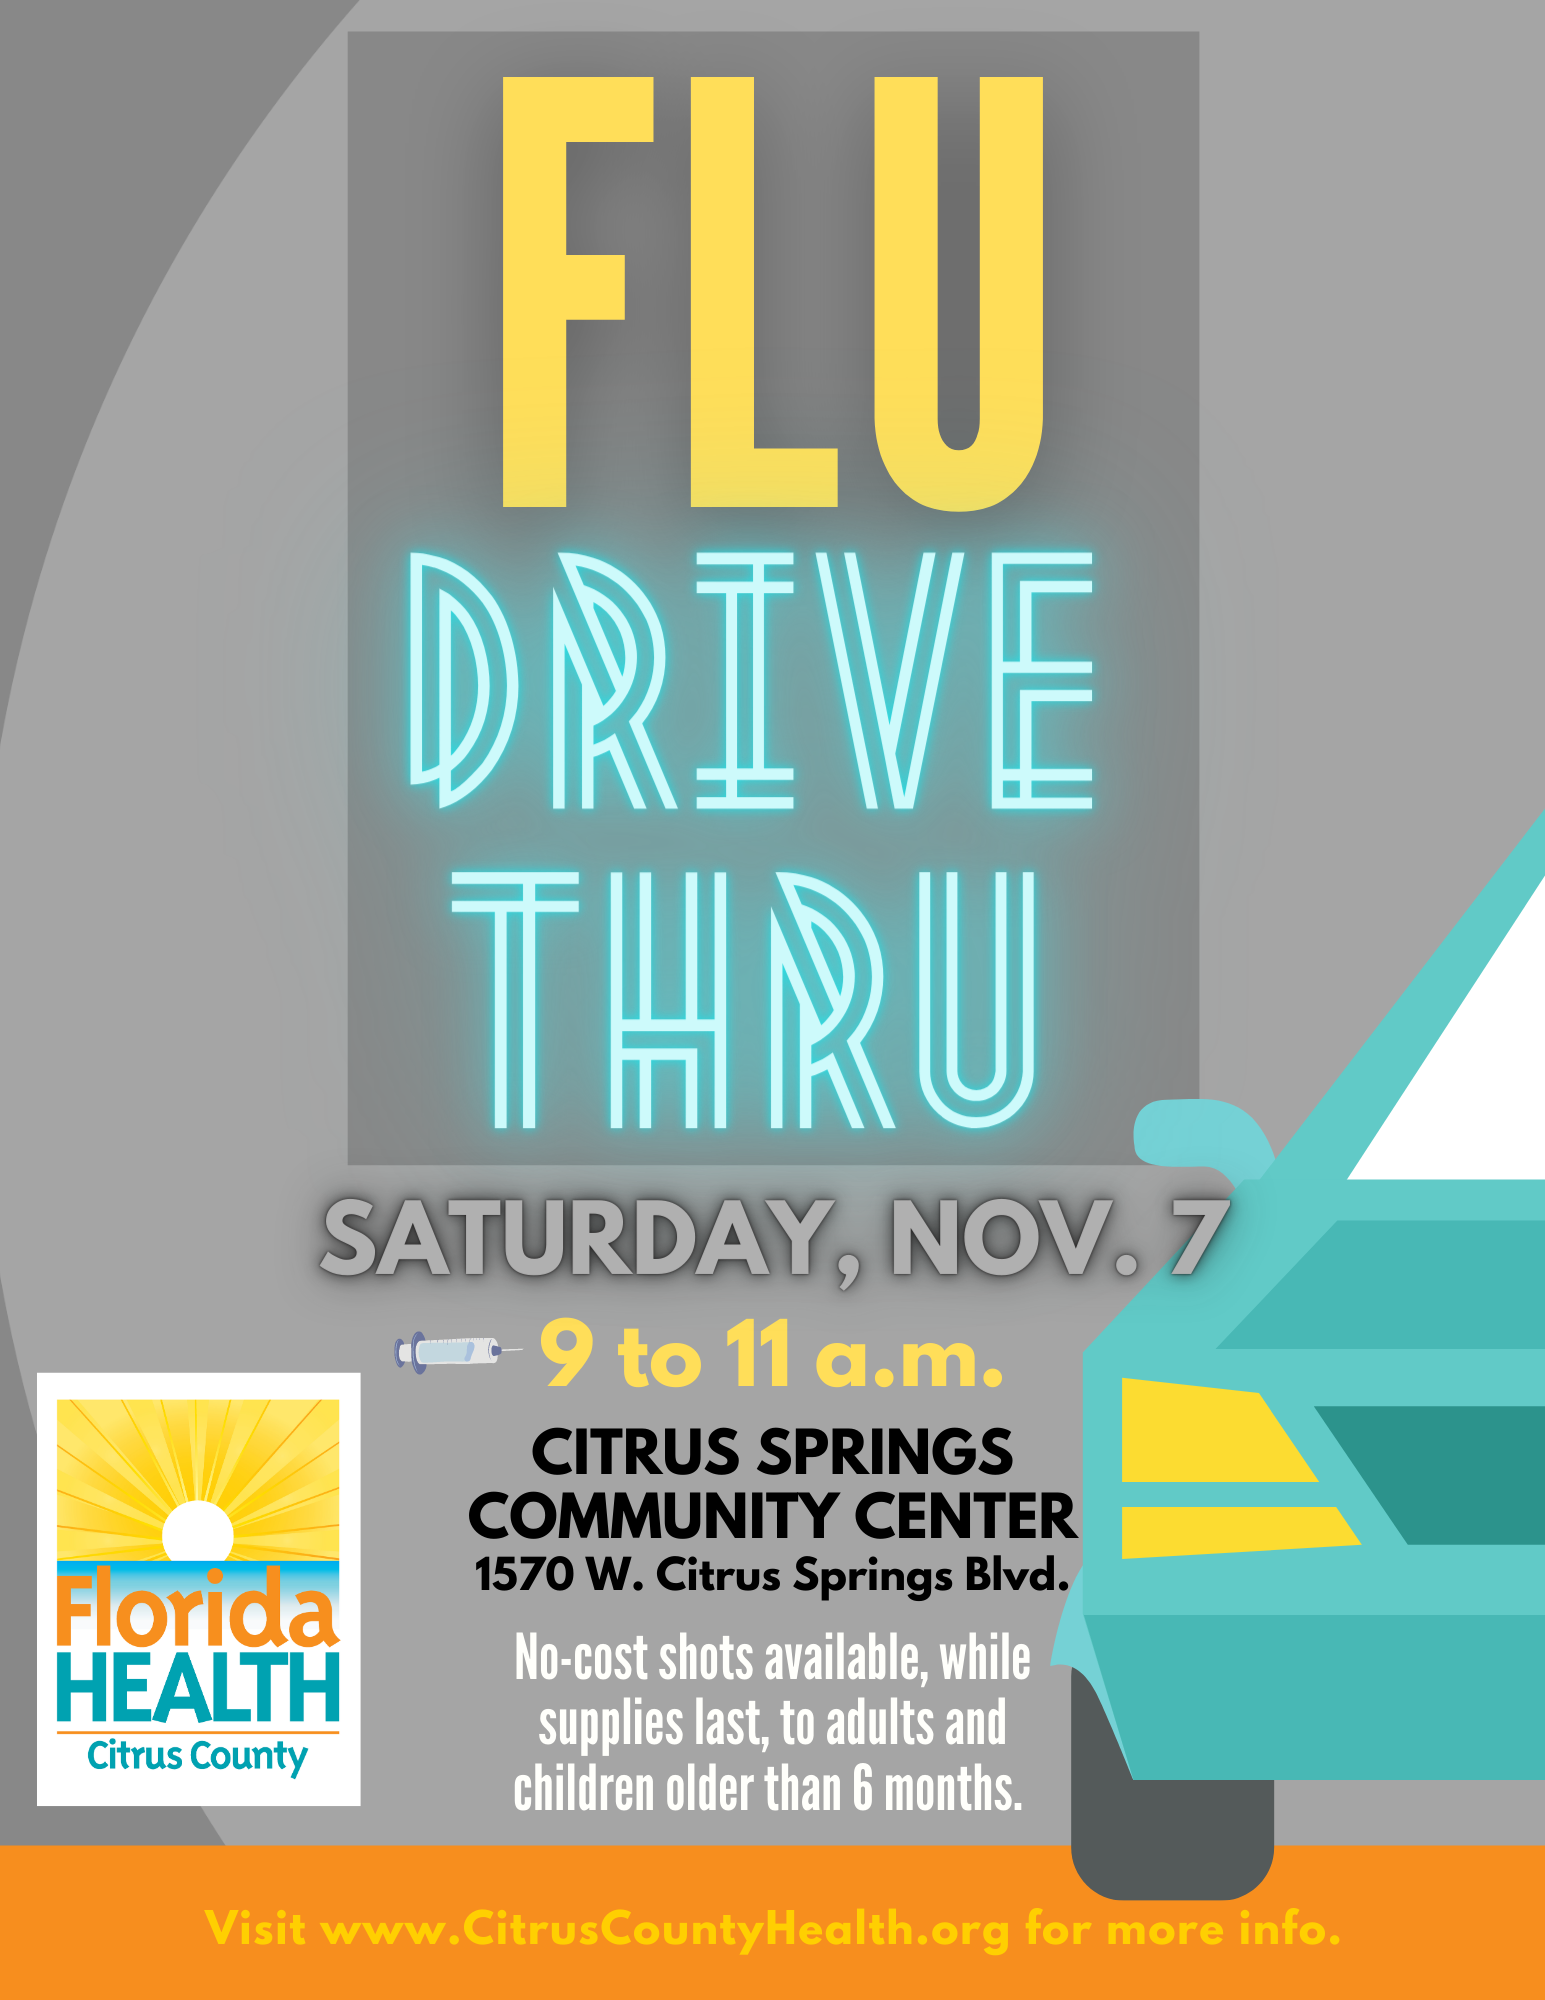 FLU drive thru on Saturday, Nov. 7, 9 a.m. to 11 a.m.  at the Citrus Springs Community Center, 1570 W. Citrus Springs Blvd. No-cost shots will be available, while supplies last, to adults and children older than 6 months. Visit citruscountyhealth.org  